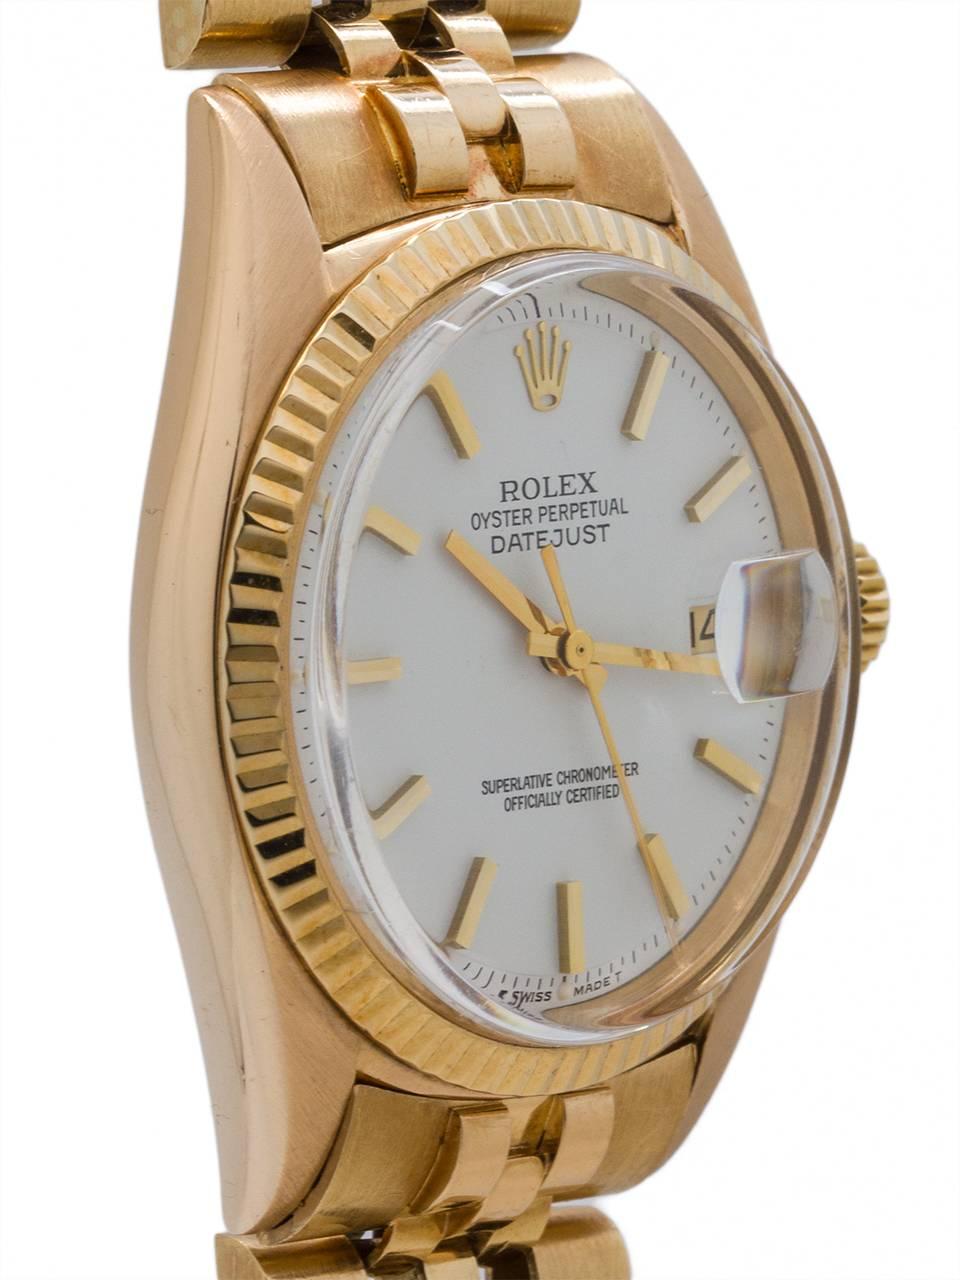 
Rolex 18K gold Datejust ref# 1601 serial number 2.5 million circa 1970. Featuring a 36mm diameter Oyster case with fluted bezel, acrylic crystal and signed crown. With lovely, original white enamel dial with applied gold indexes and gilt baton